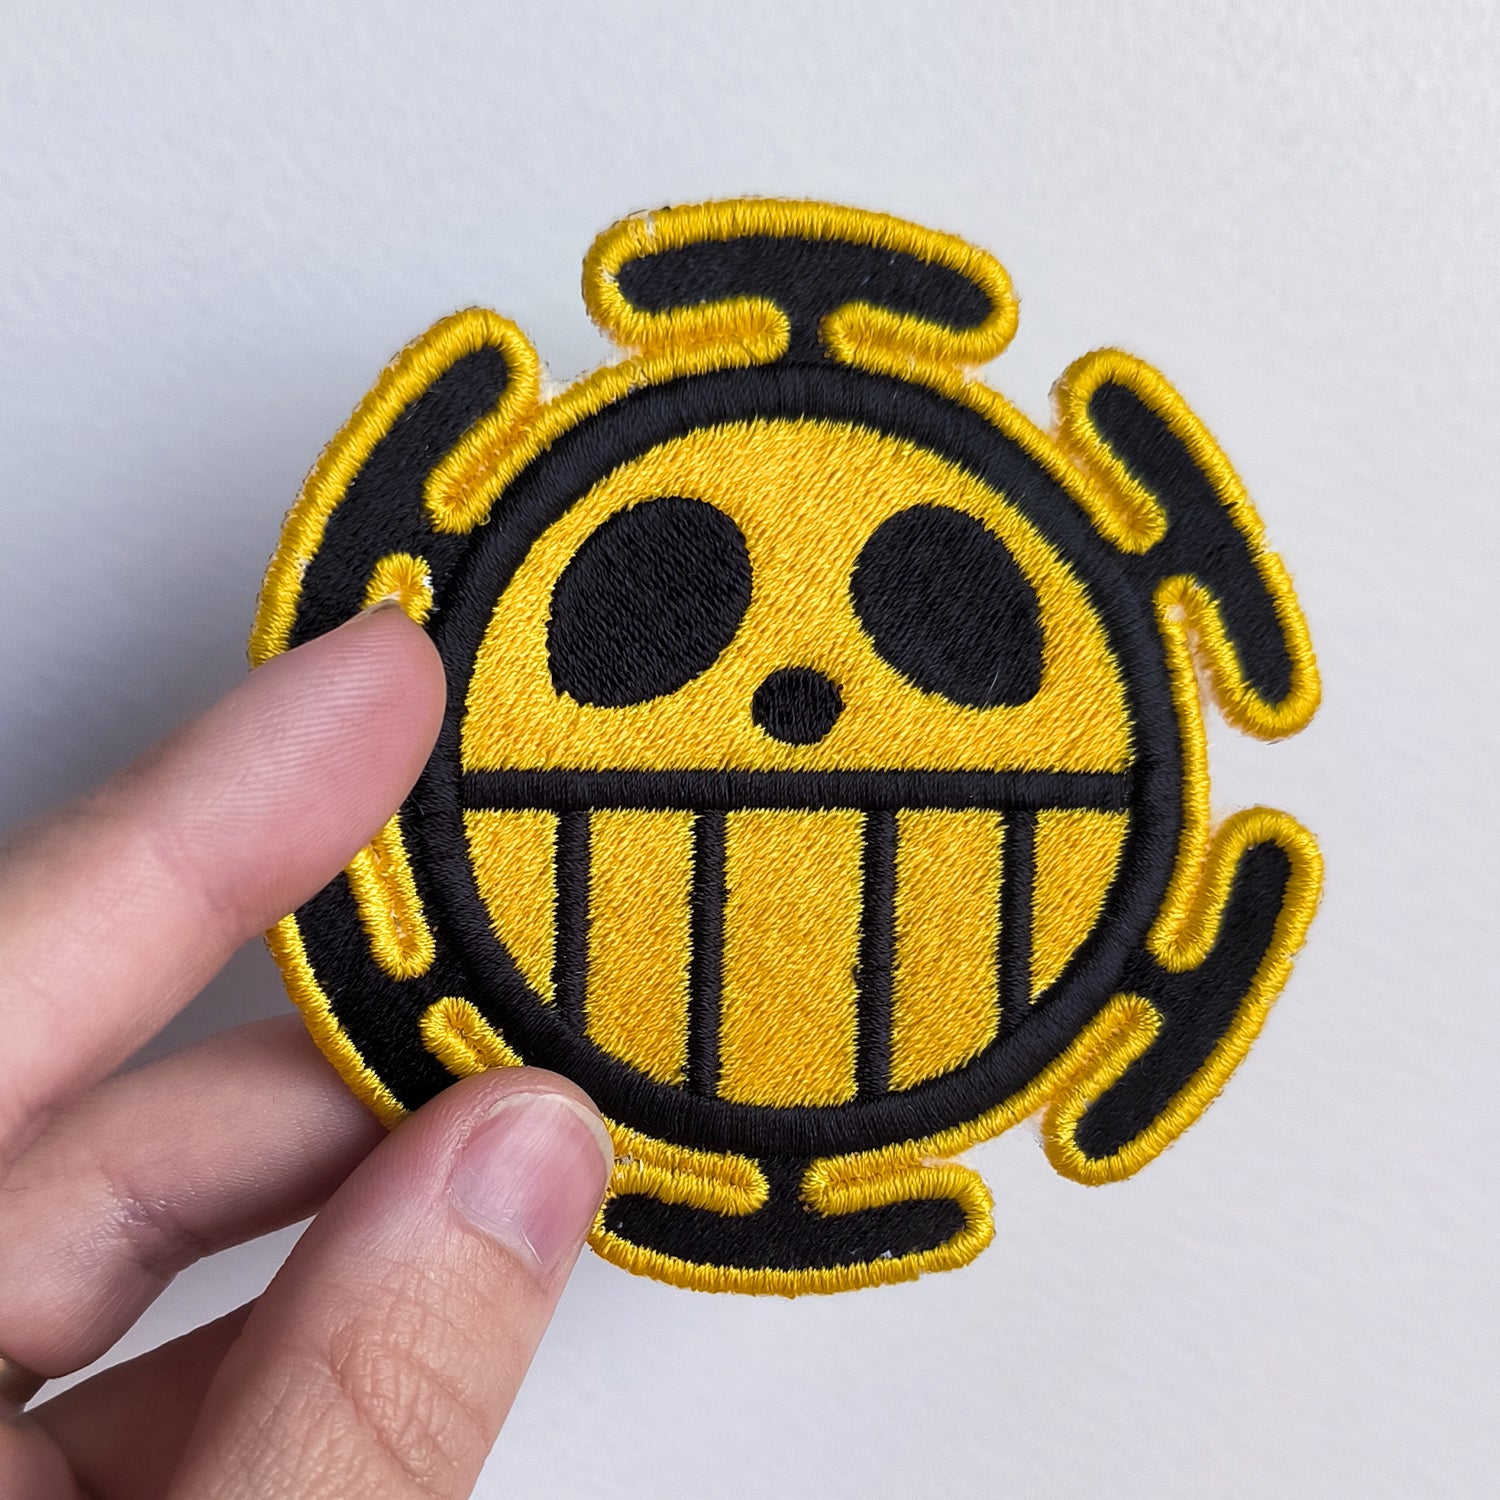 One Piece Jolly Roger Skull Anime Embroidered Patch 8cm